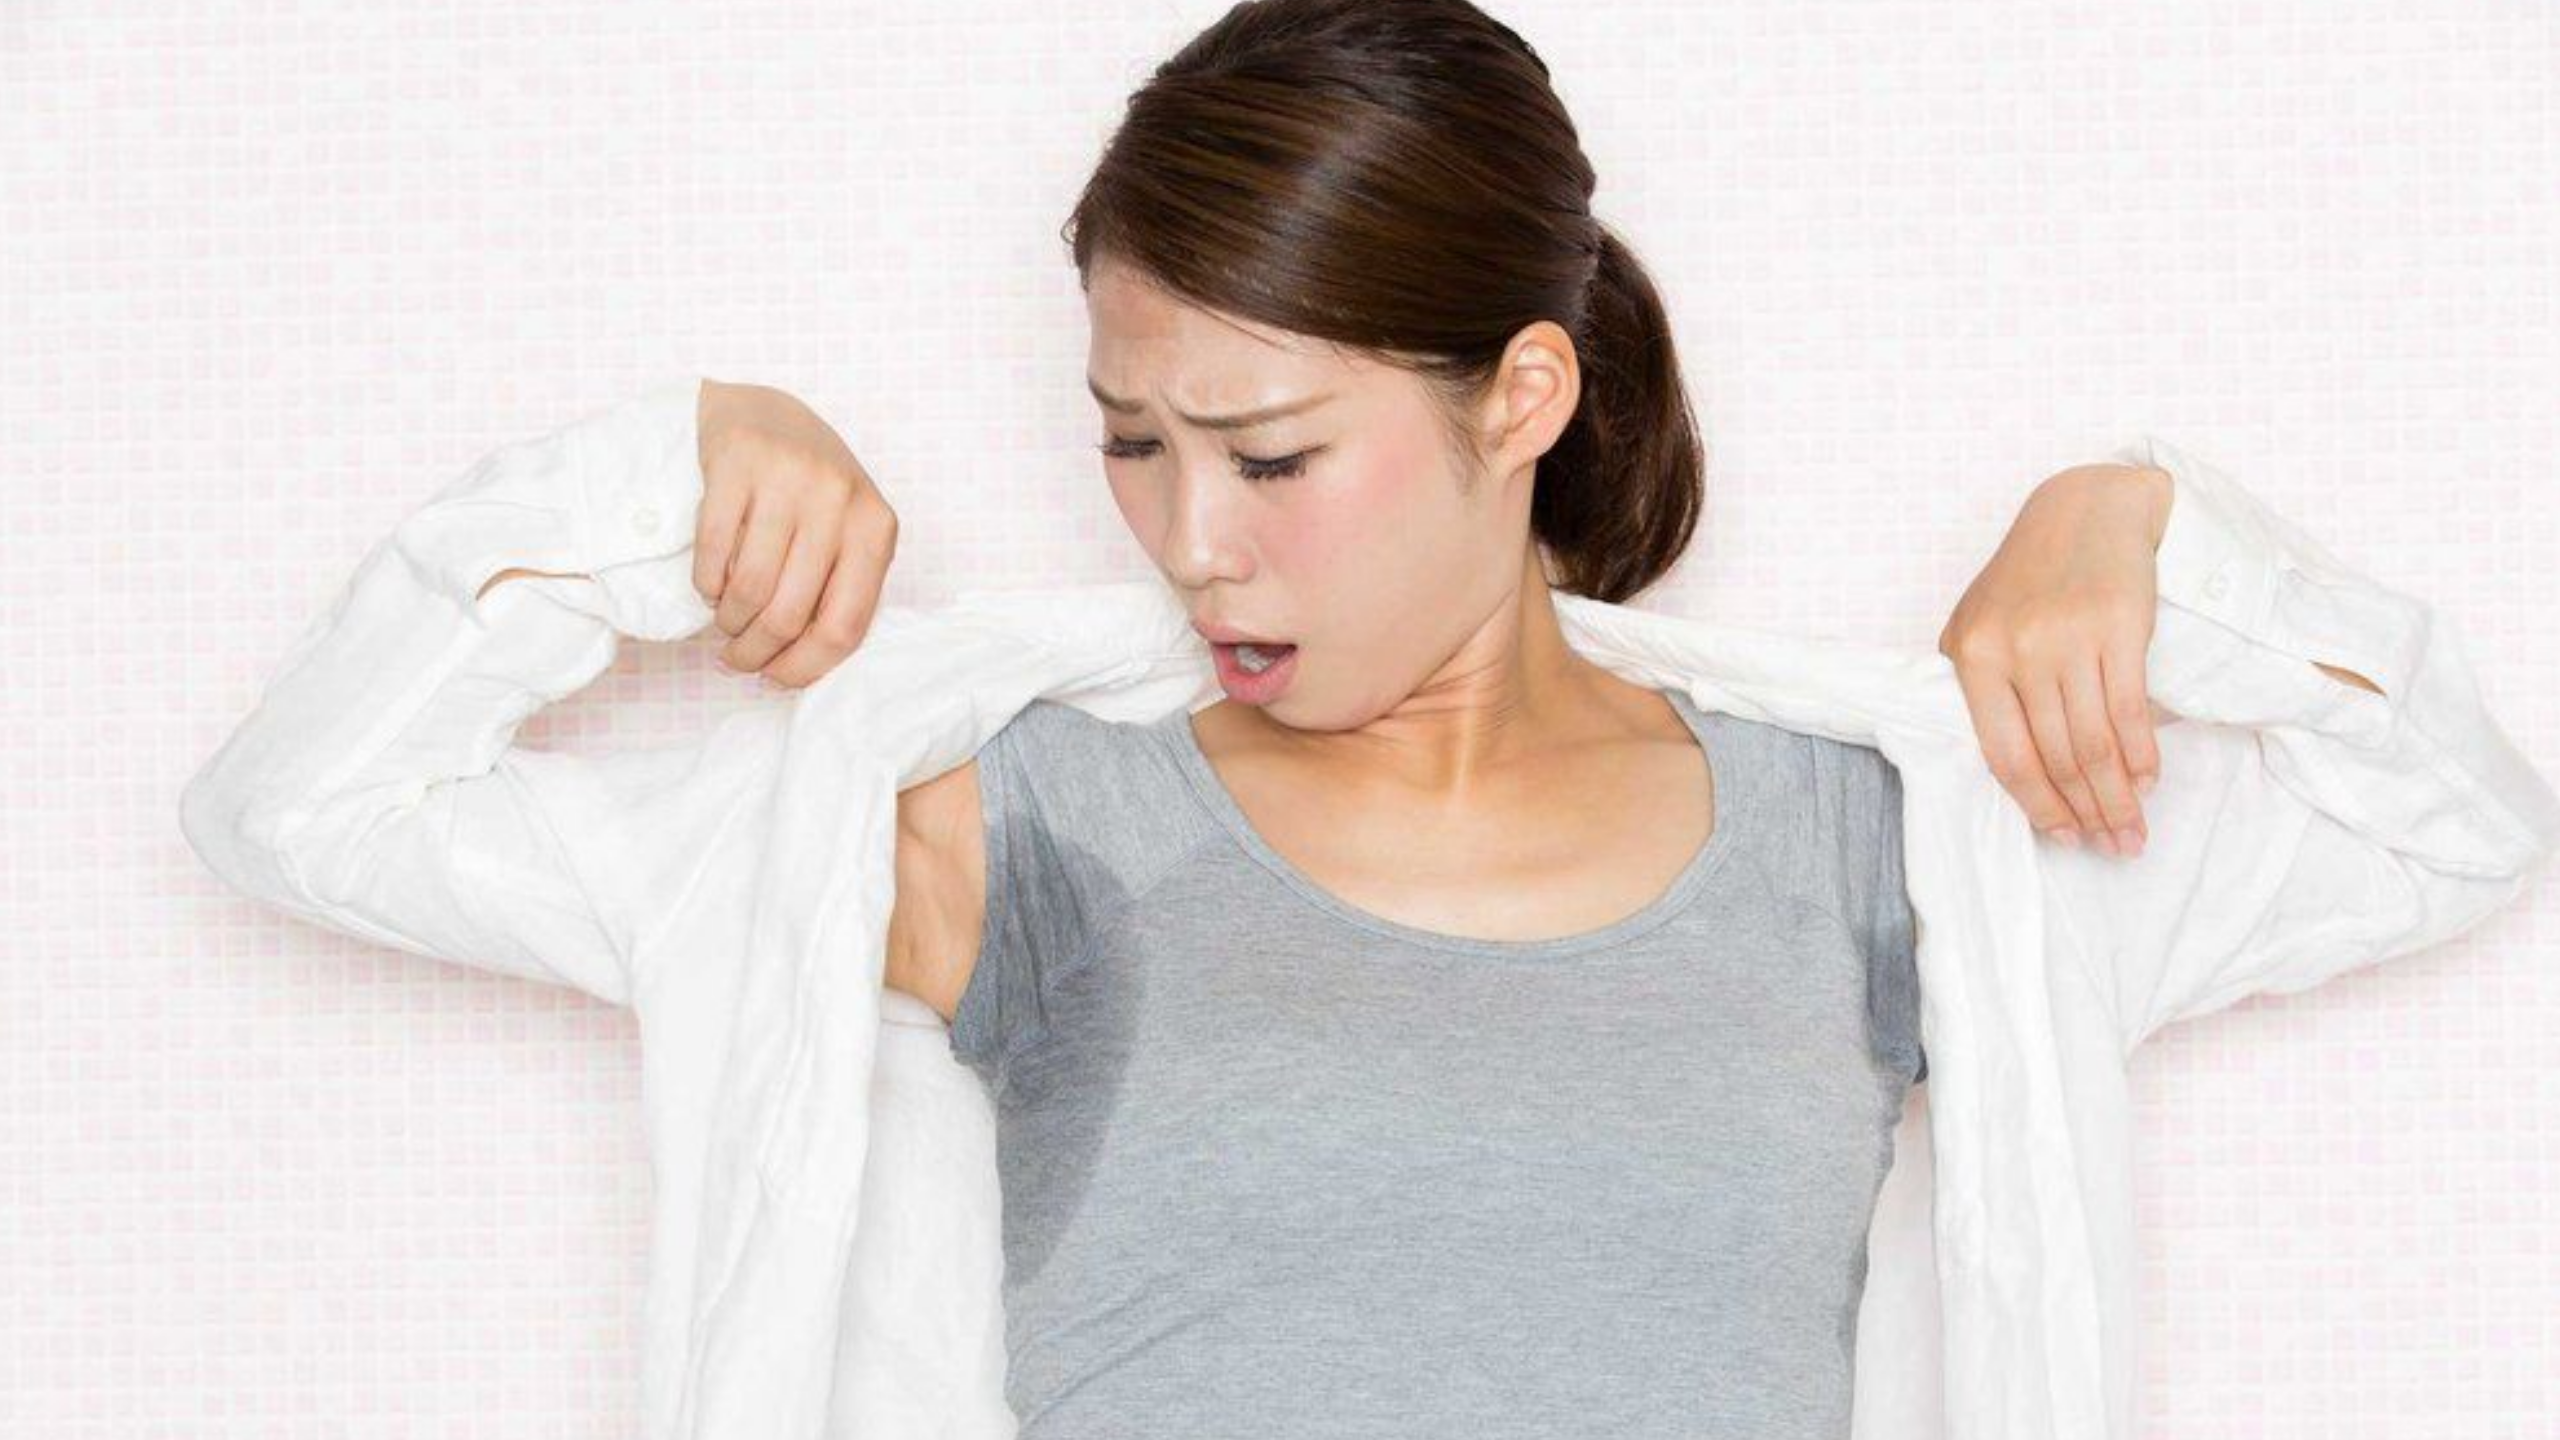 Hyperhidrosis Treatment How To Stop Sweaty Underarms In A Week